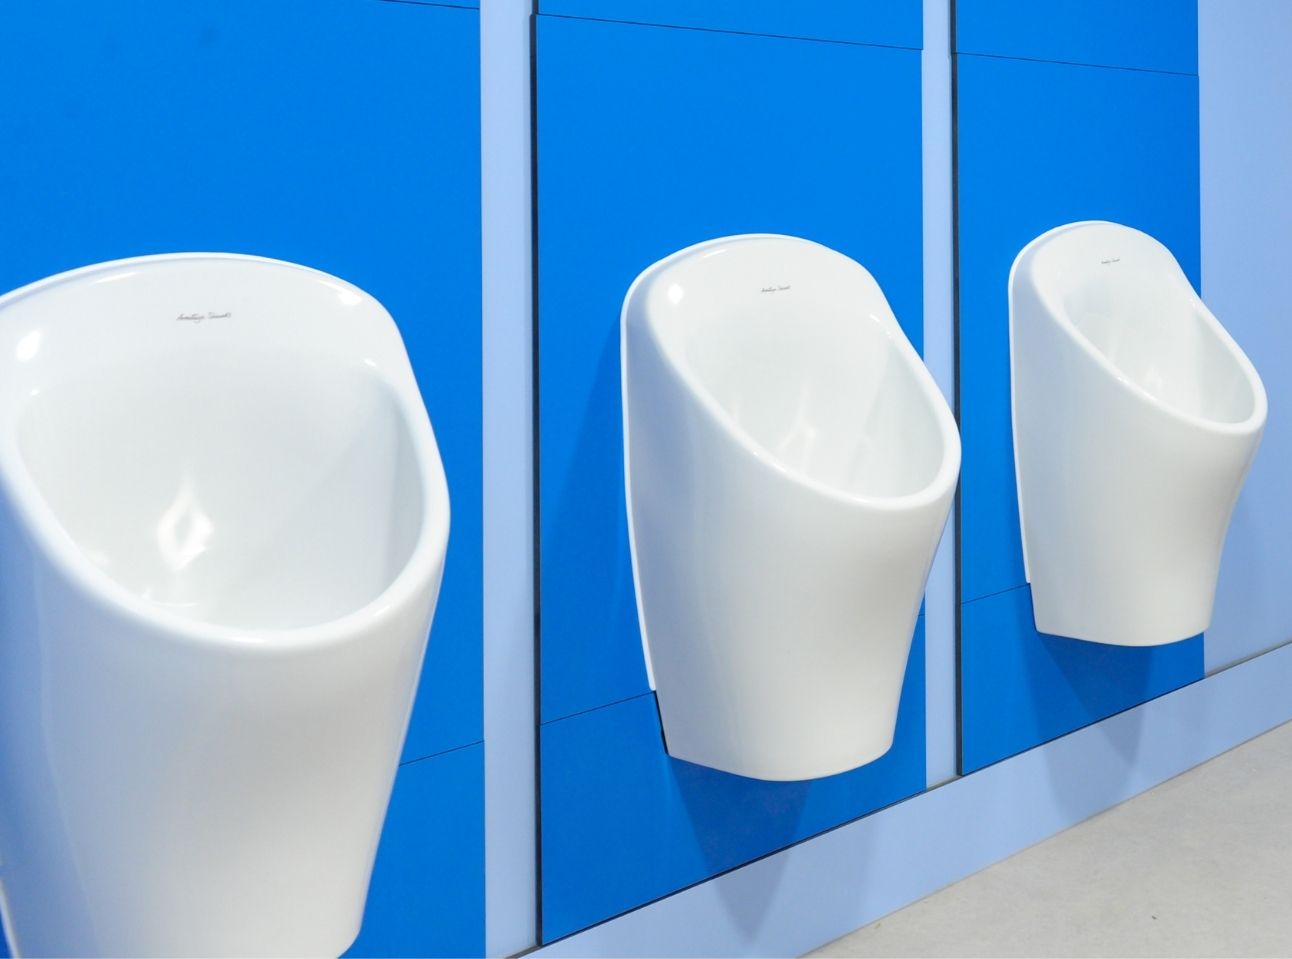 Bournemouth & Poole College Toilets Refurbishment | Case Study | Commercial Washrooms